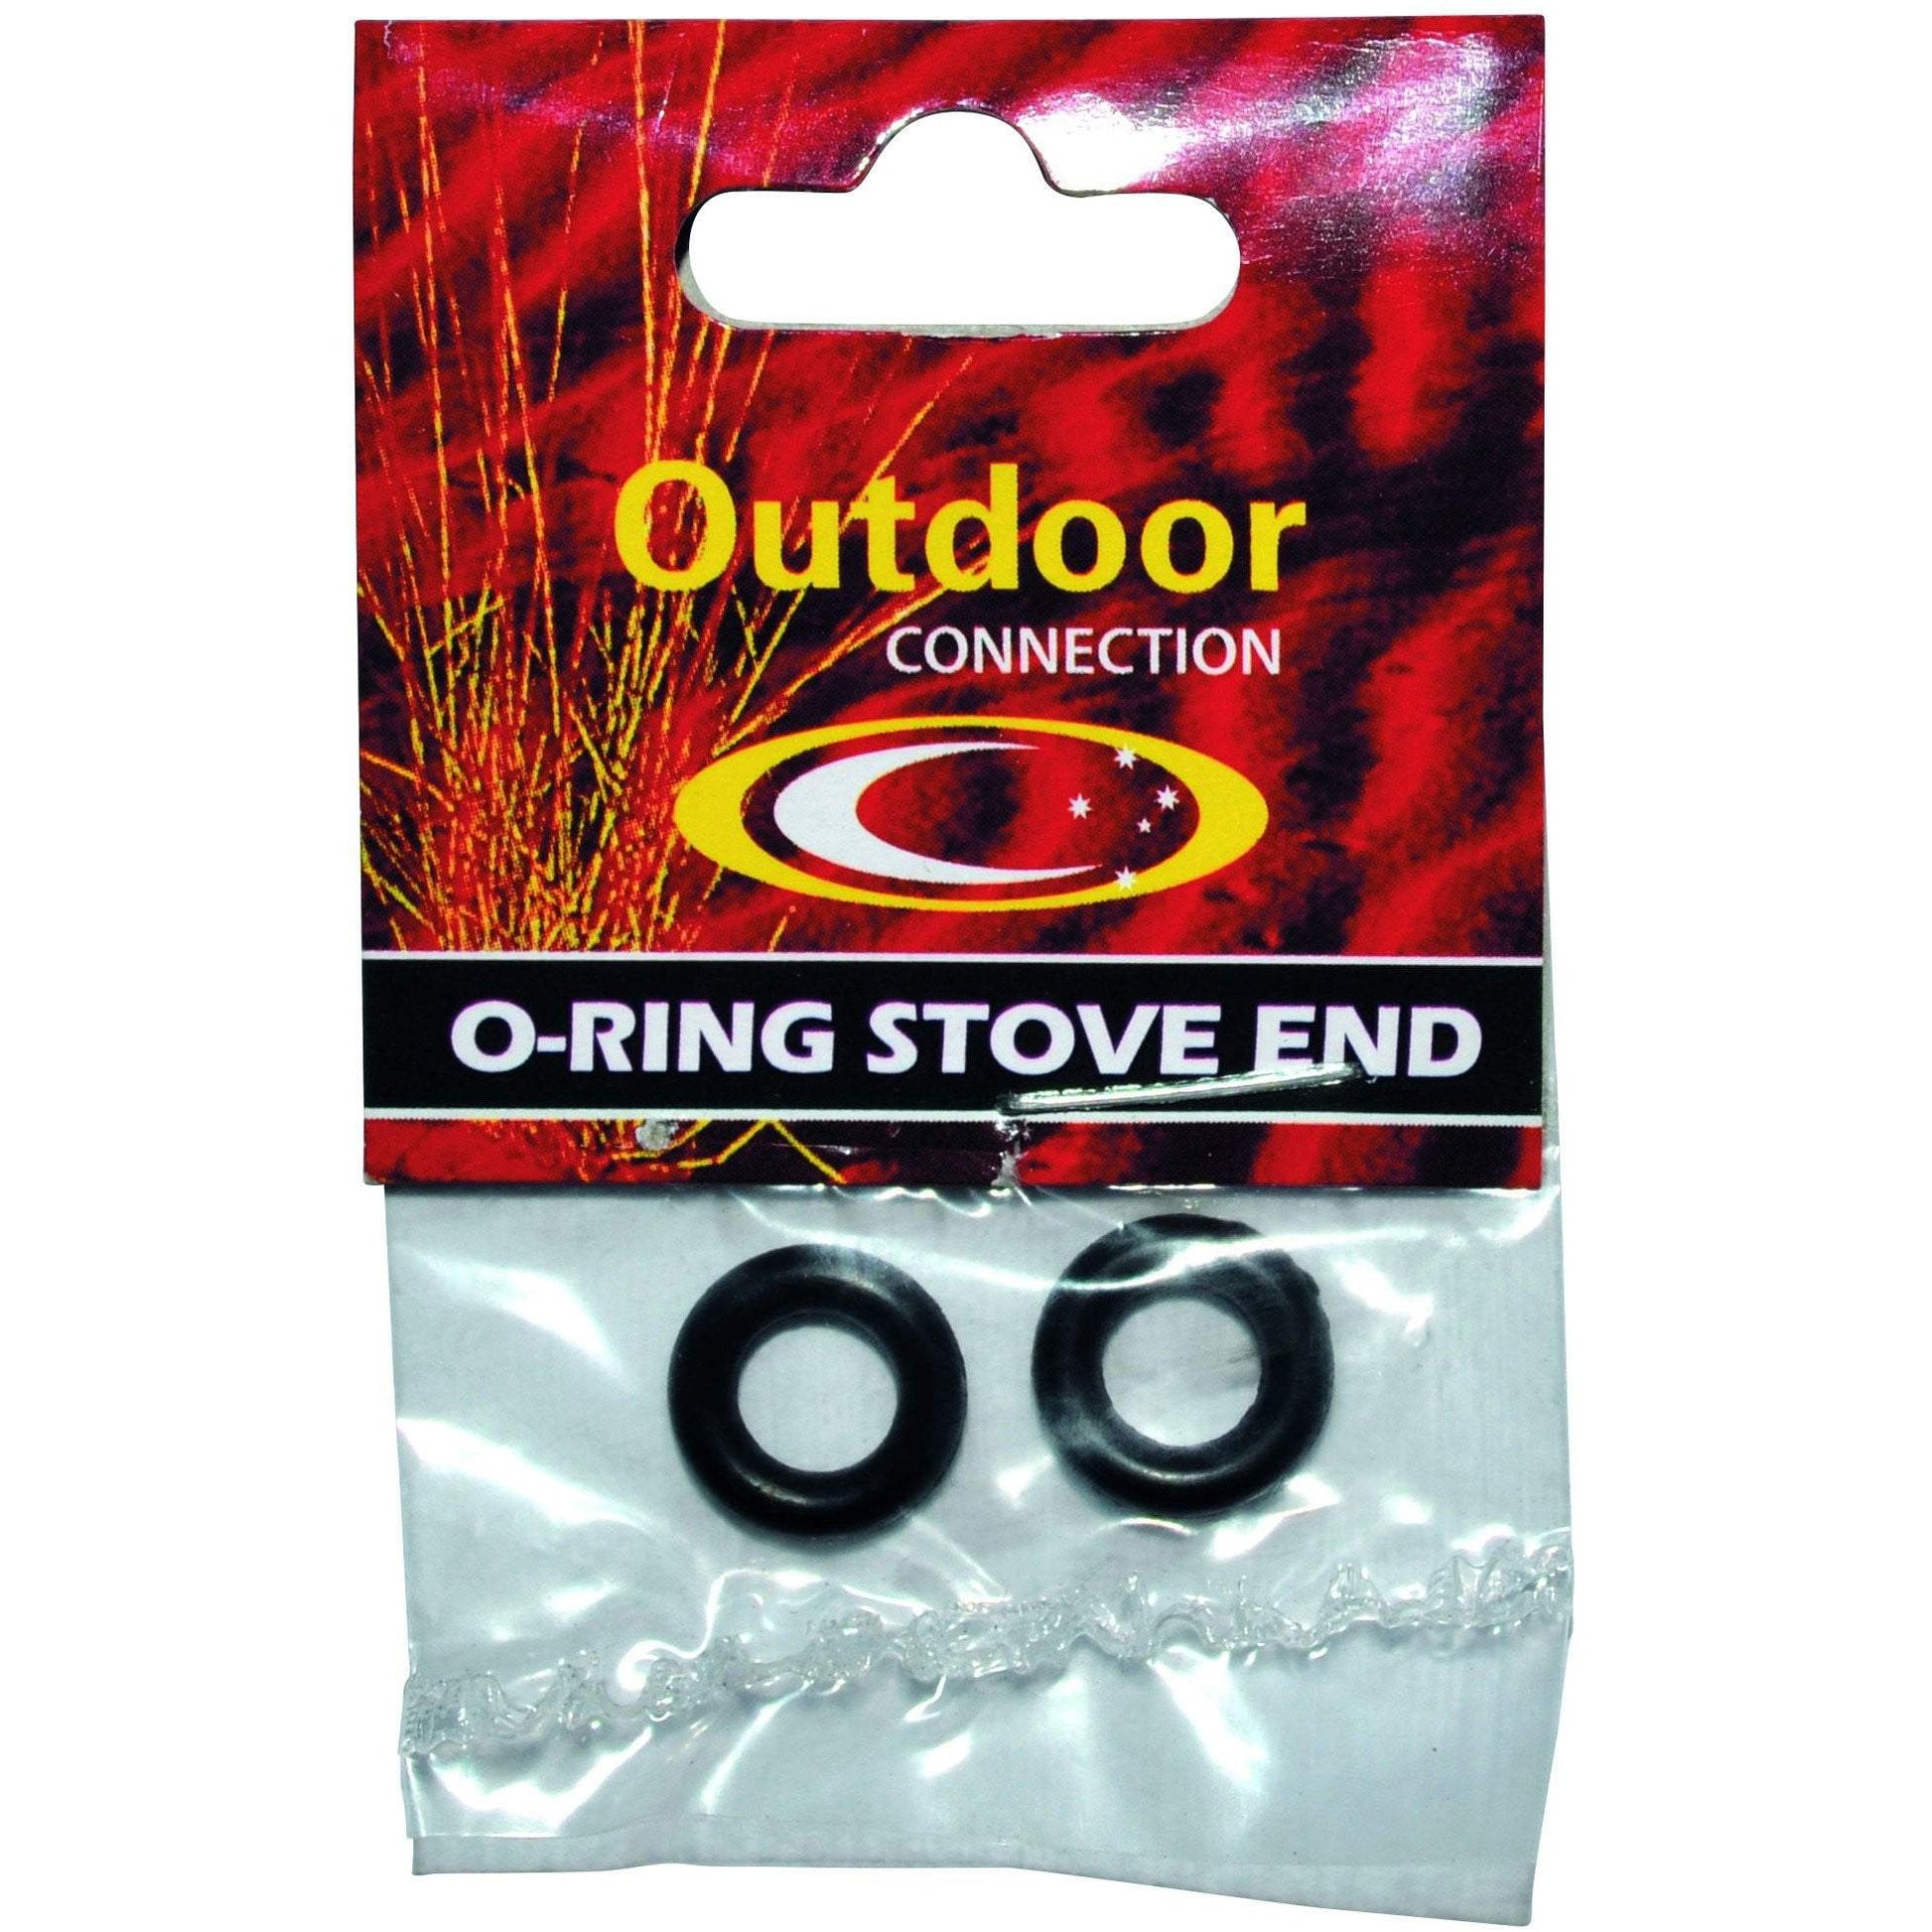 Outdoor Connection Stove End O Ring (Per 2)-Suits Standard 2 Burner, Premier 2 & 3 Burner Stove (GS.12, GS.14 & GS.15)